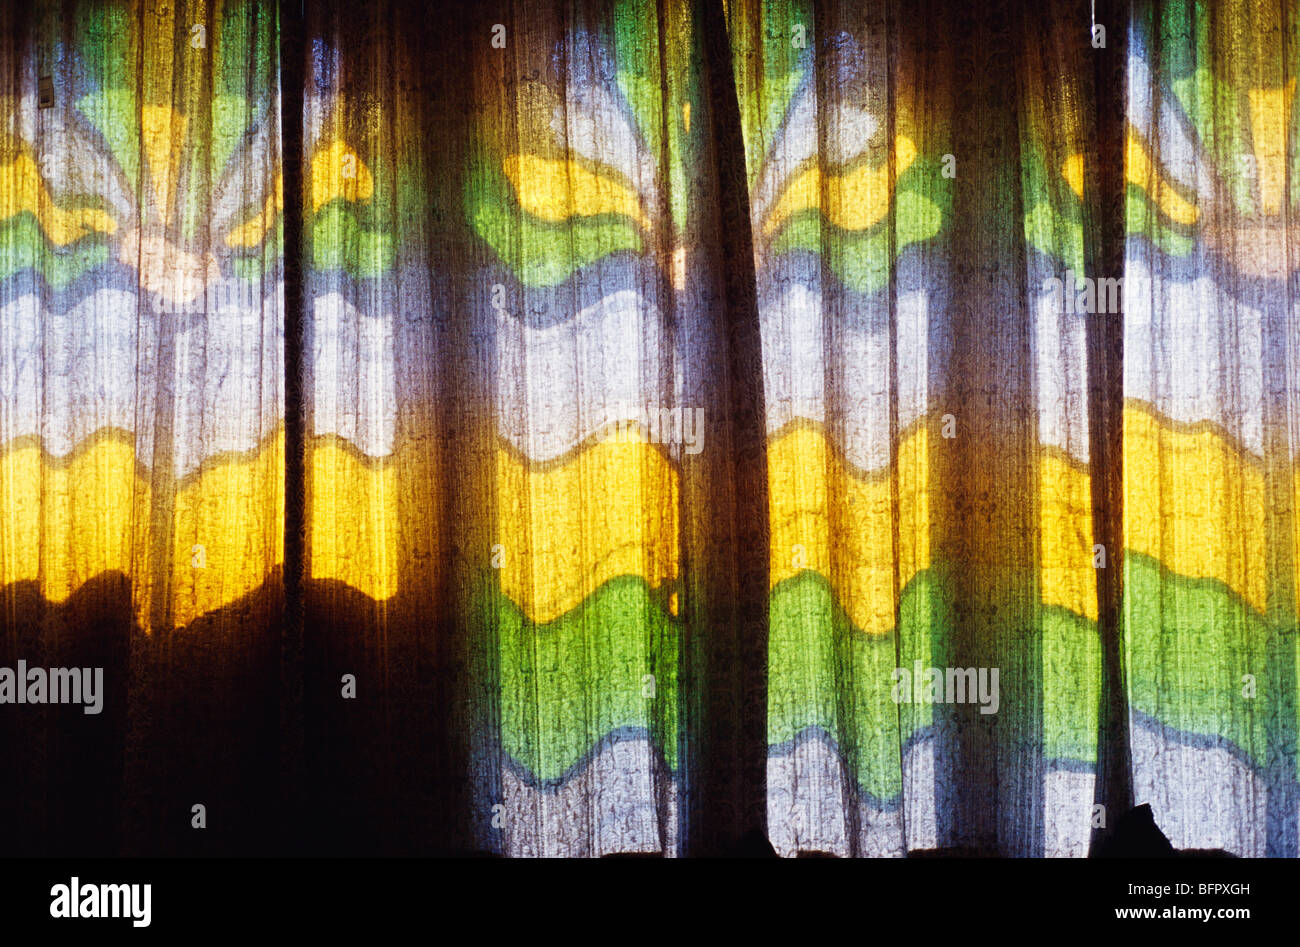 NGS 66672 : Curtains ; Udaipur ; Rajasthan ; India Stock Photo